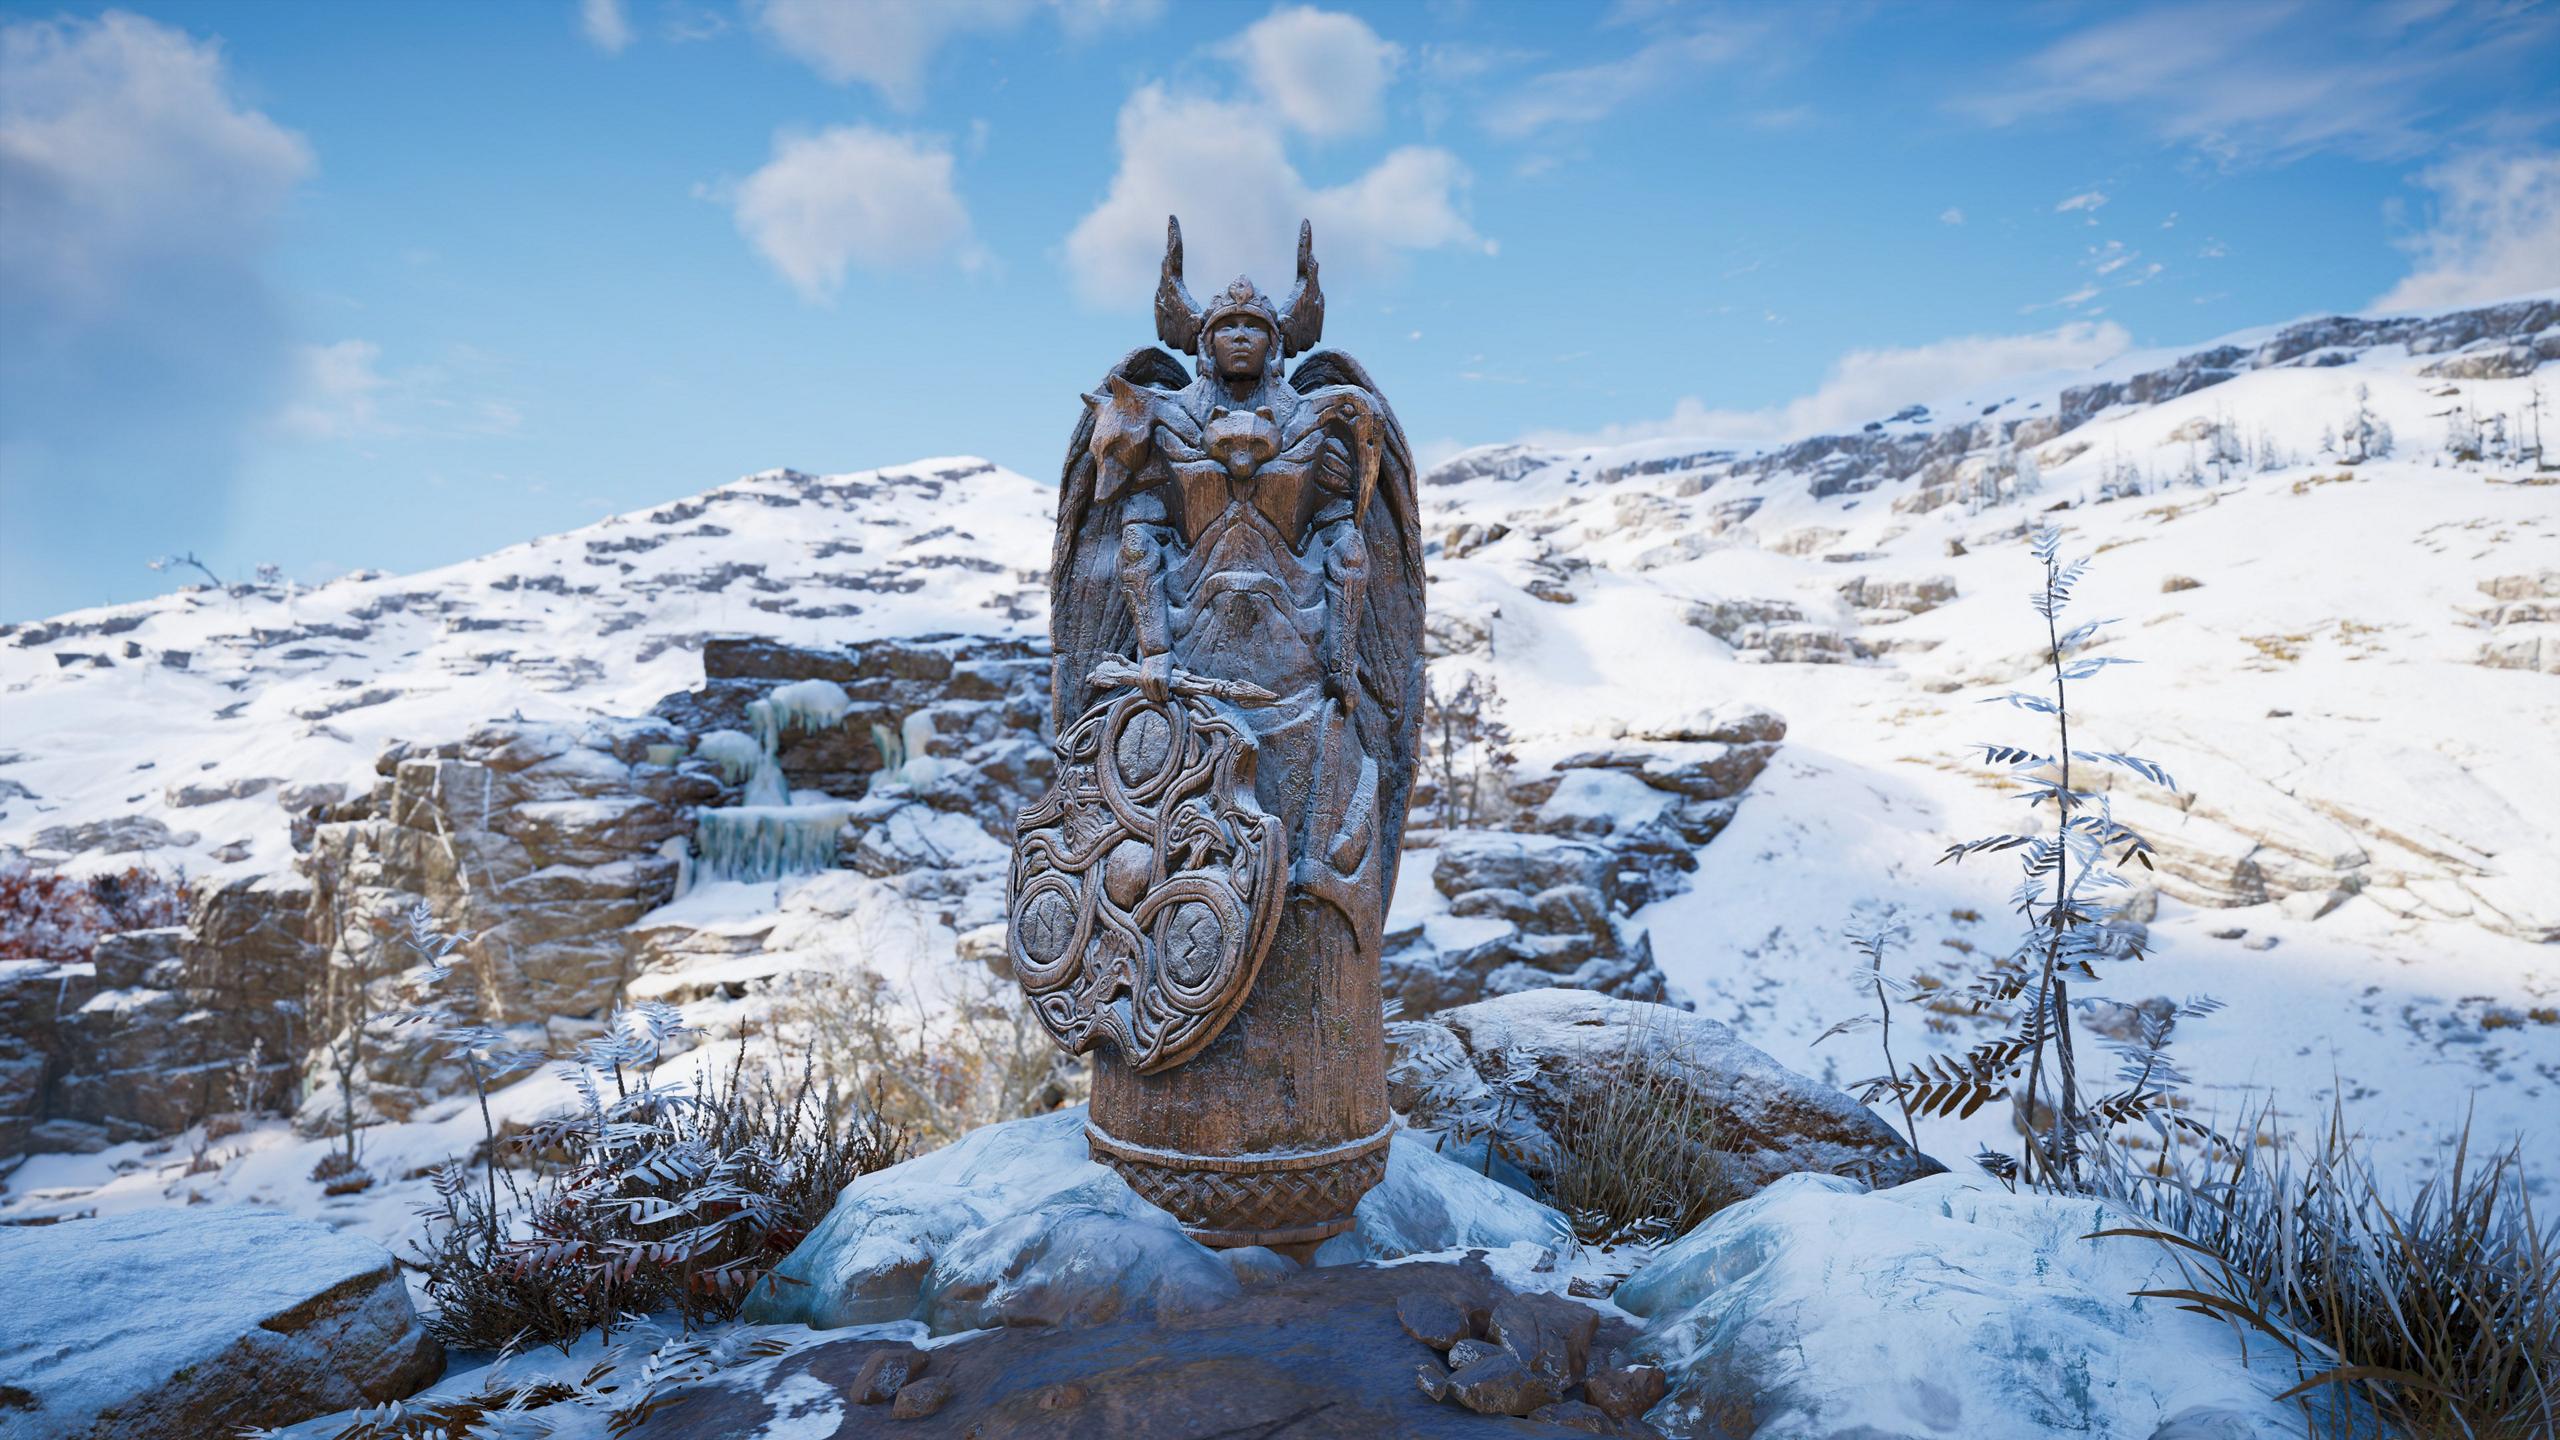 General 2560x1440 Assassin's Creed: Valhalla HDR video games CGI snow statue clouds rocks Ubisoft